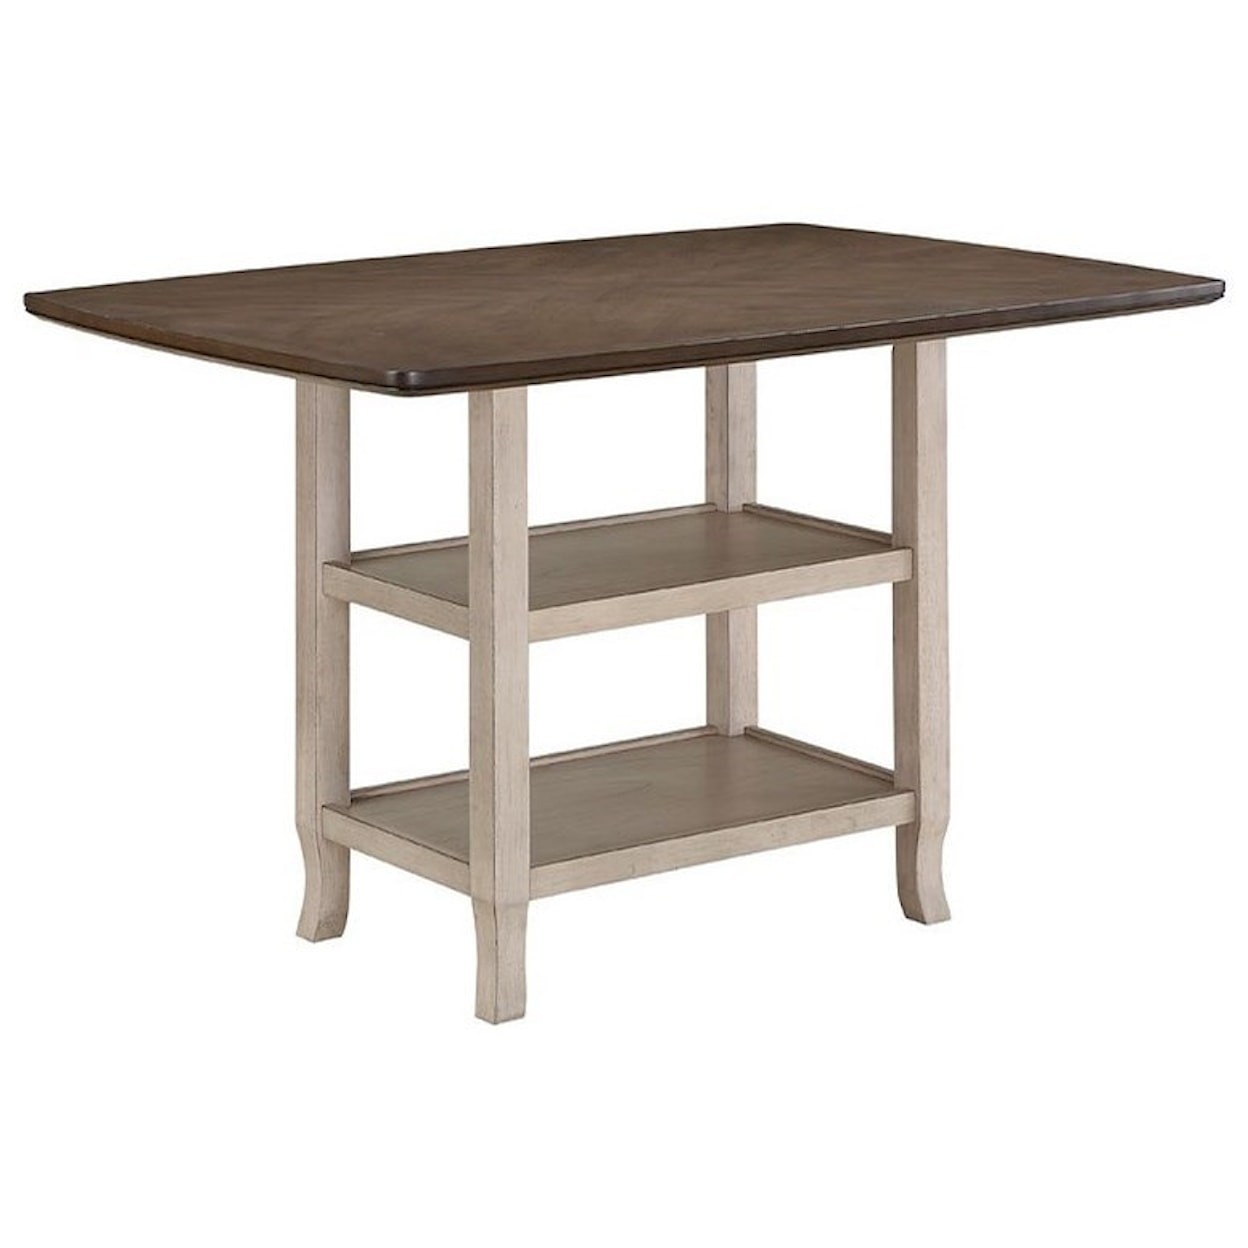 Avalon Furniture Cameo Counter Height Table